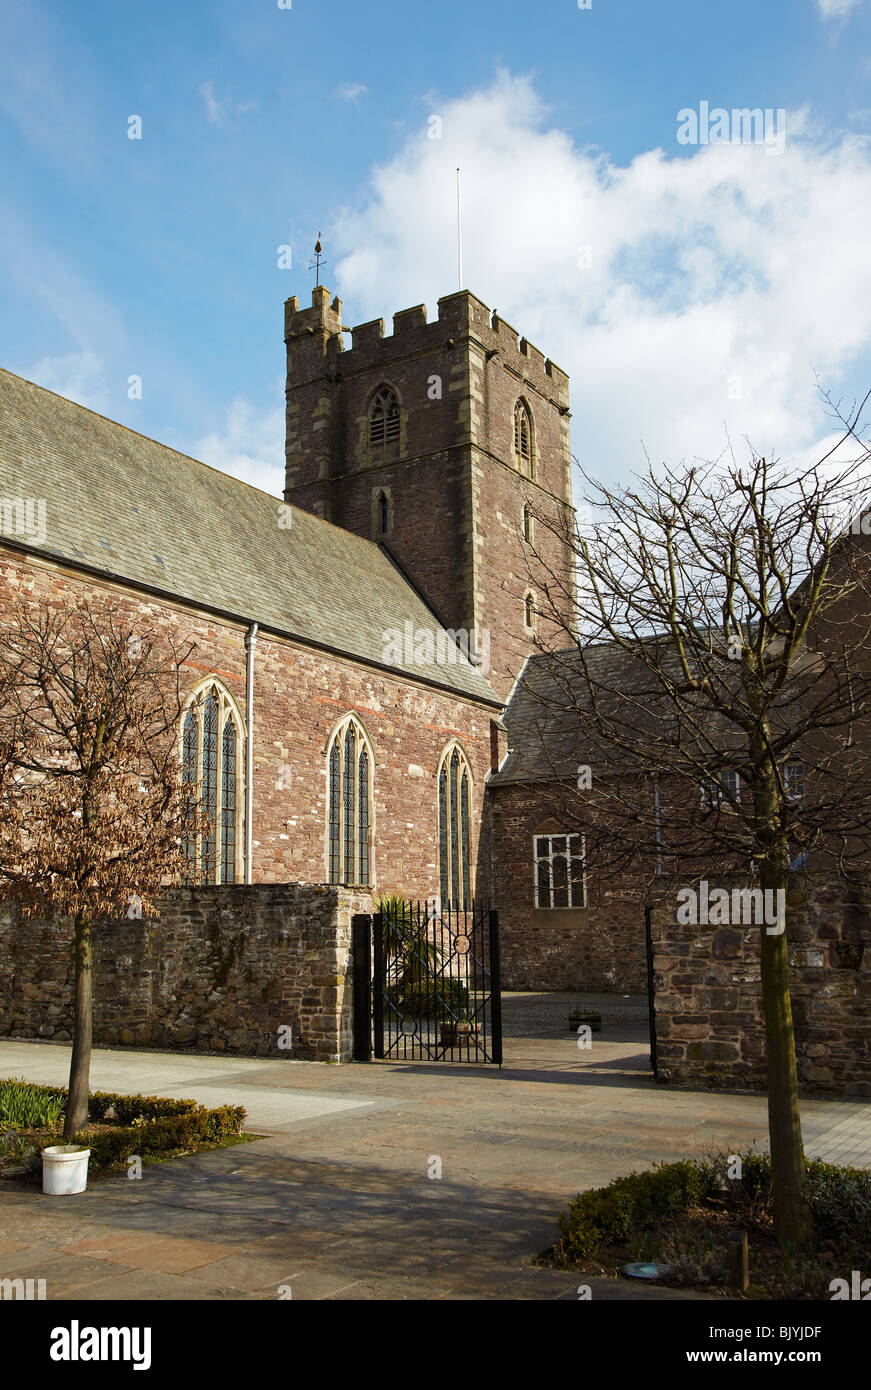 St Mary's Priory Church, Abergavenny, Monmouthshire, Wales, UK Banque D'Images